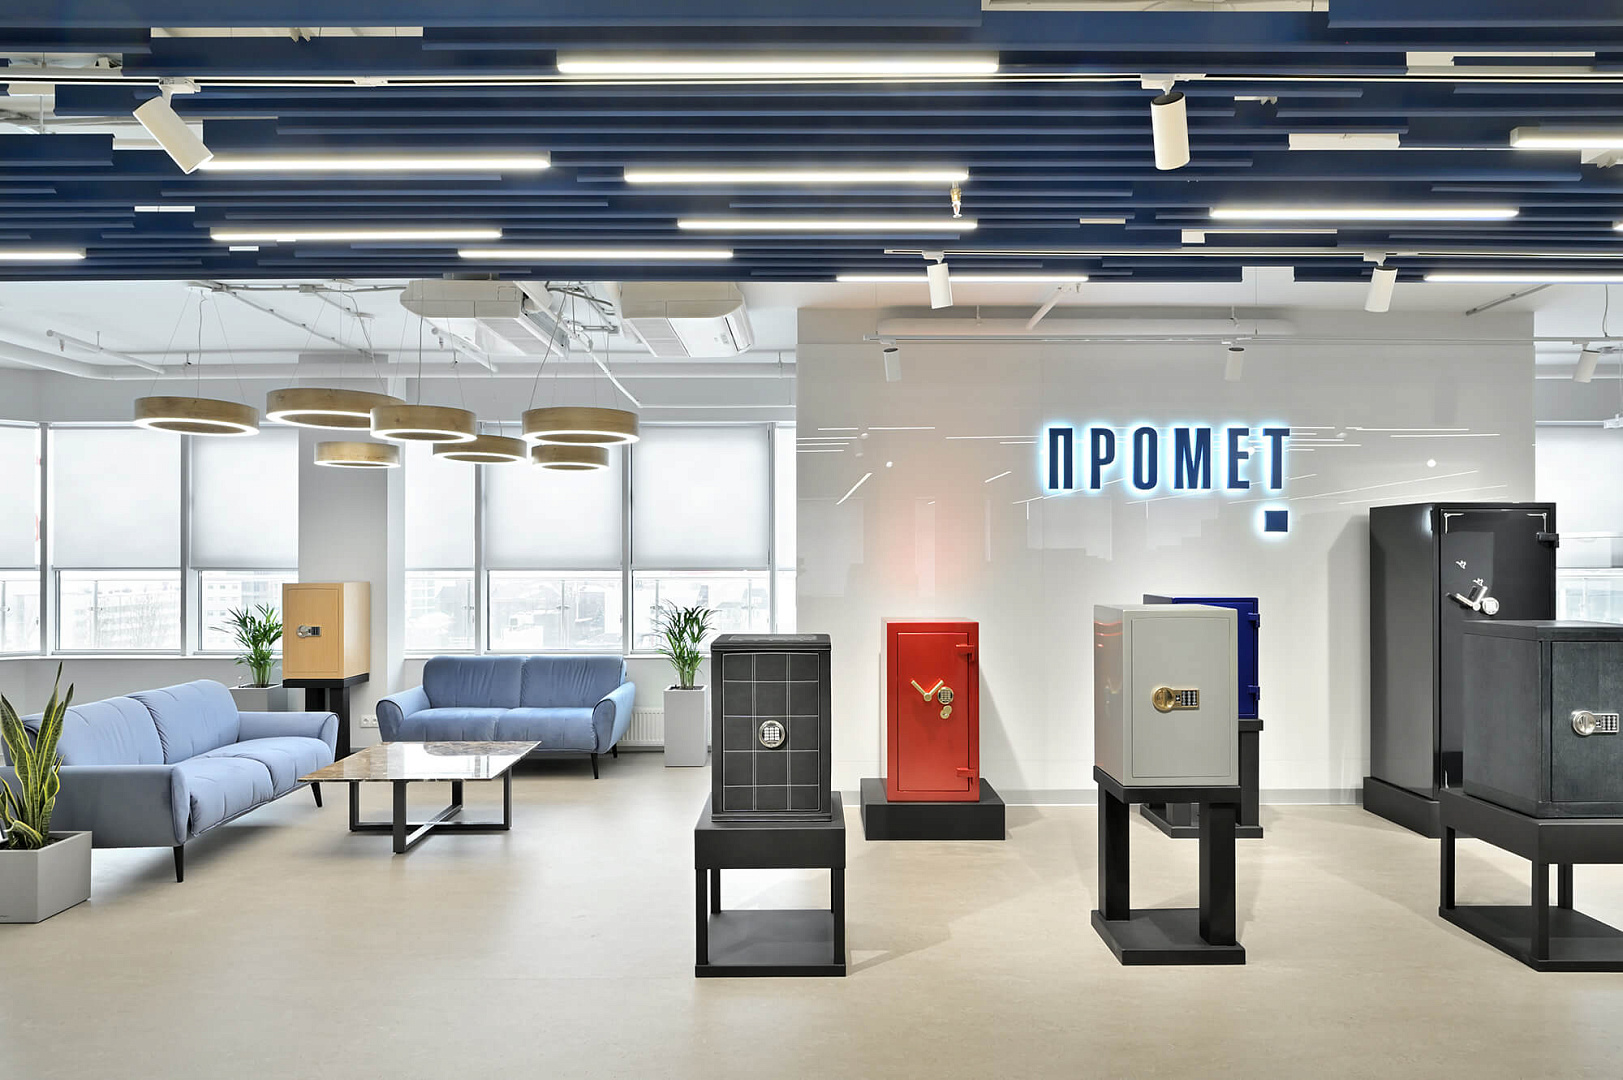 PROMET Company's Showroom by PROJECT architectural bureau